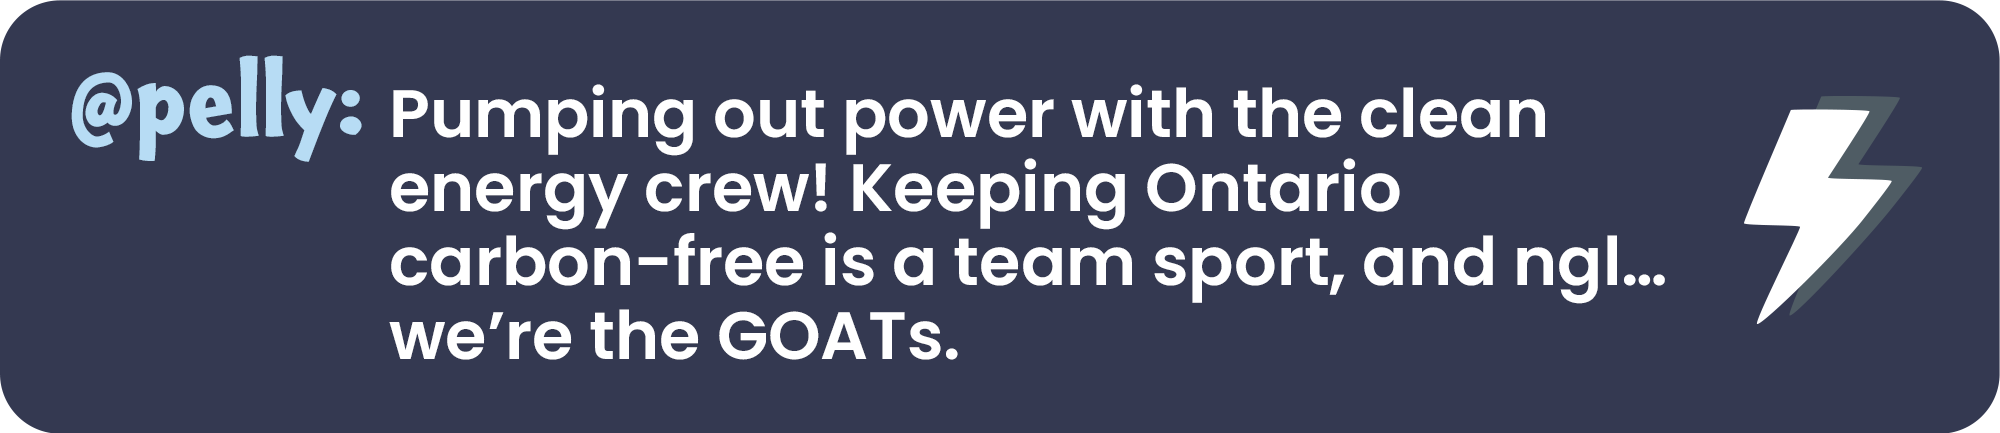 @pelly: Pumping out power with the clean energy crew! Keeping Ontario carbon-free is a team sport, and ngl... we're the GOATs.